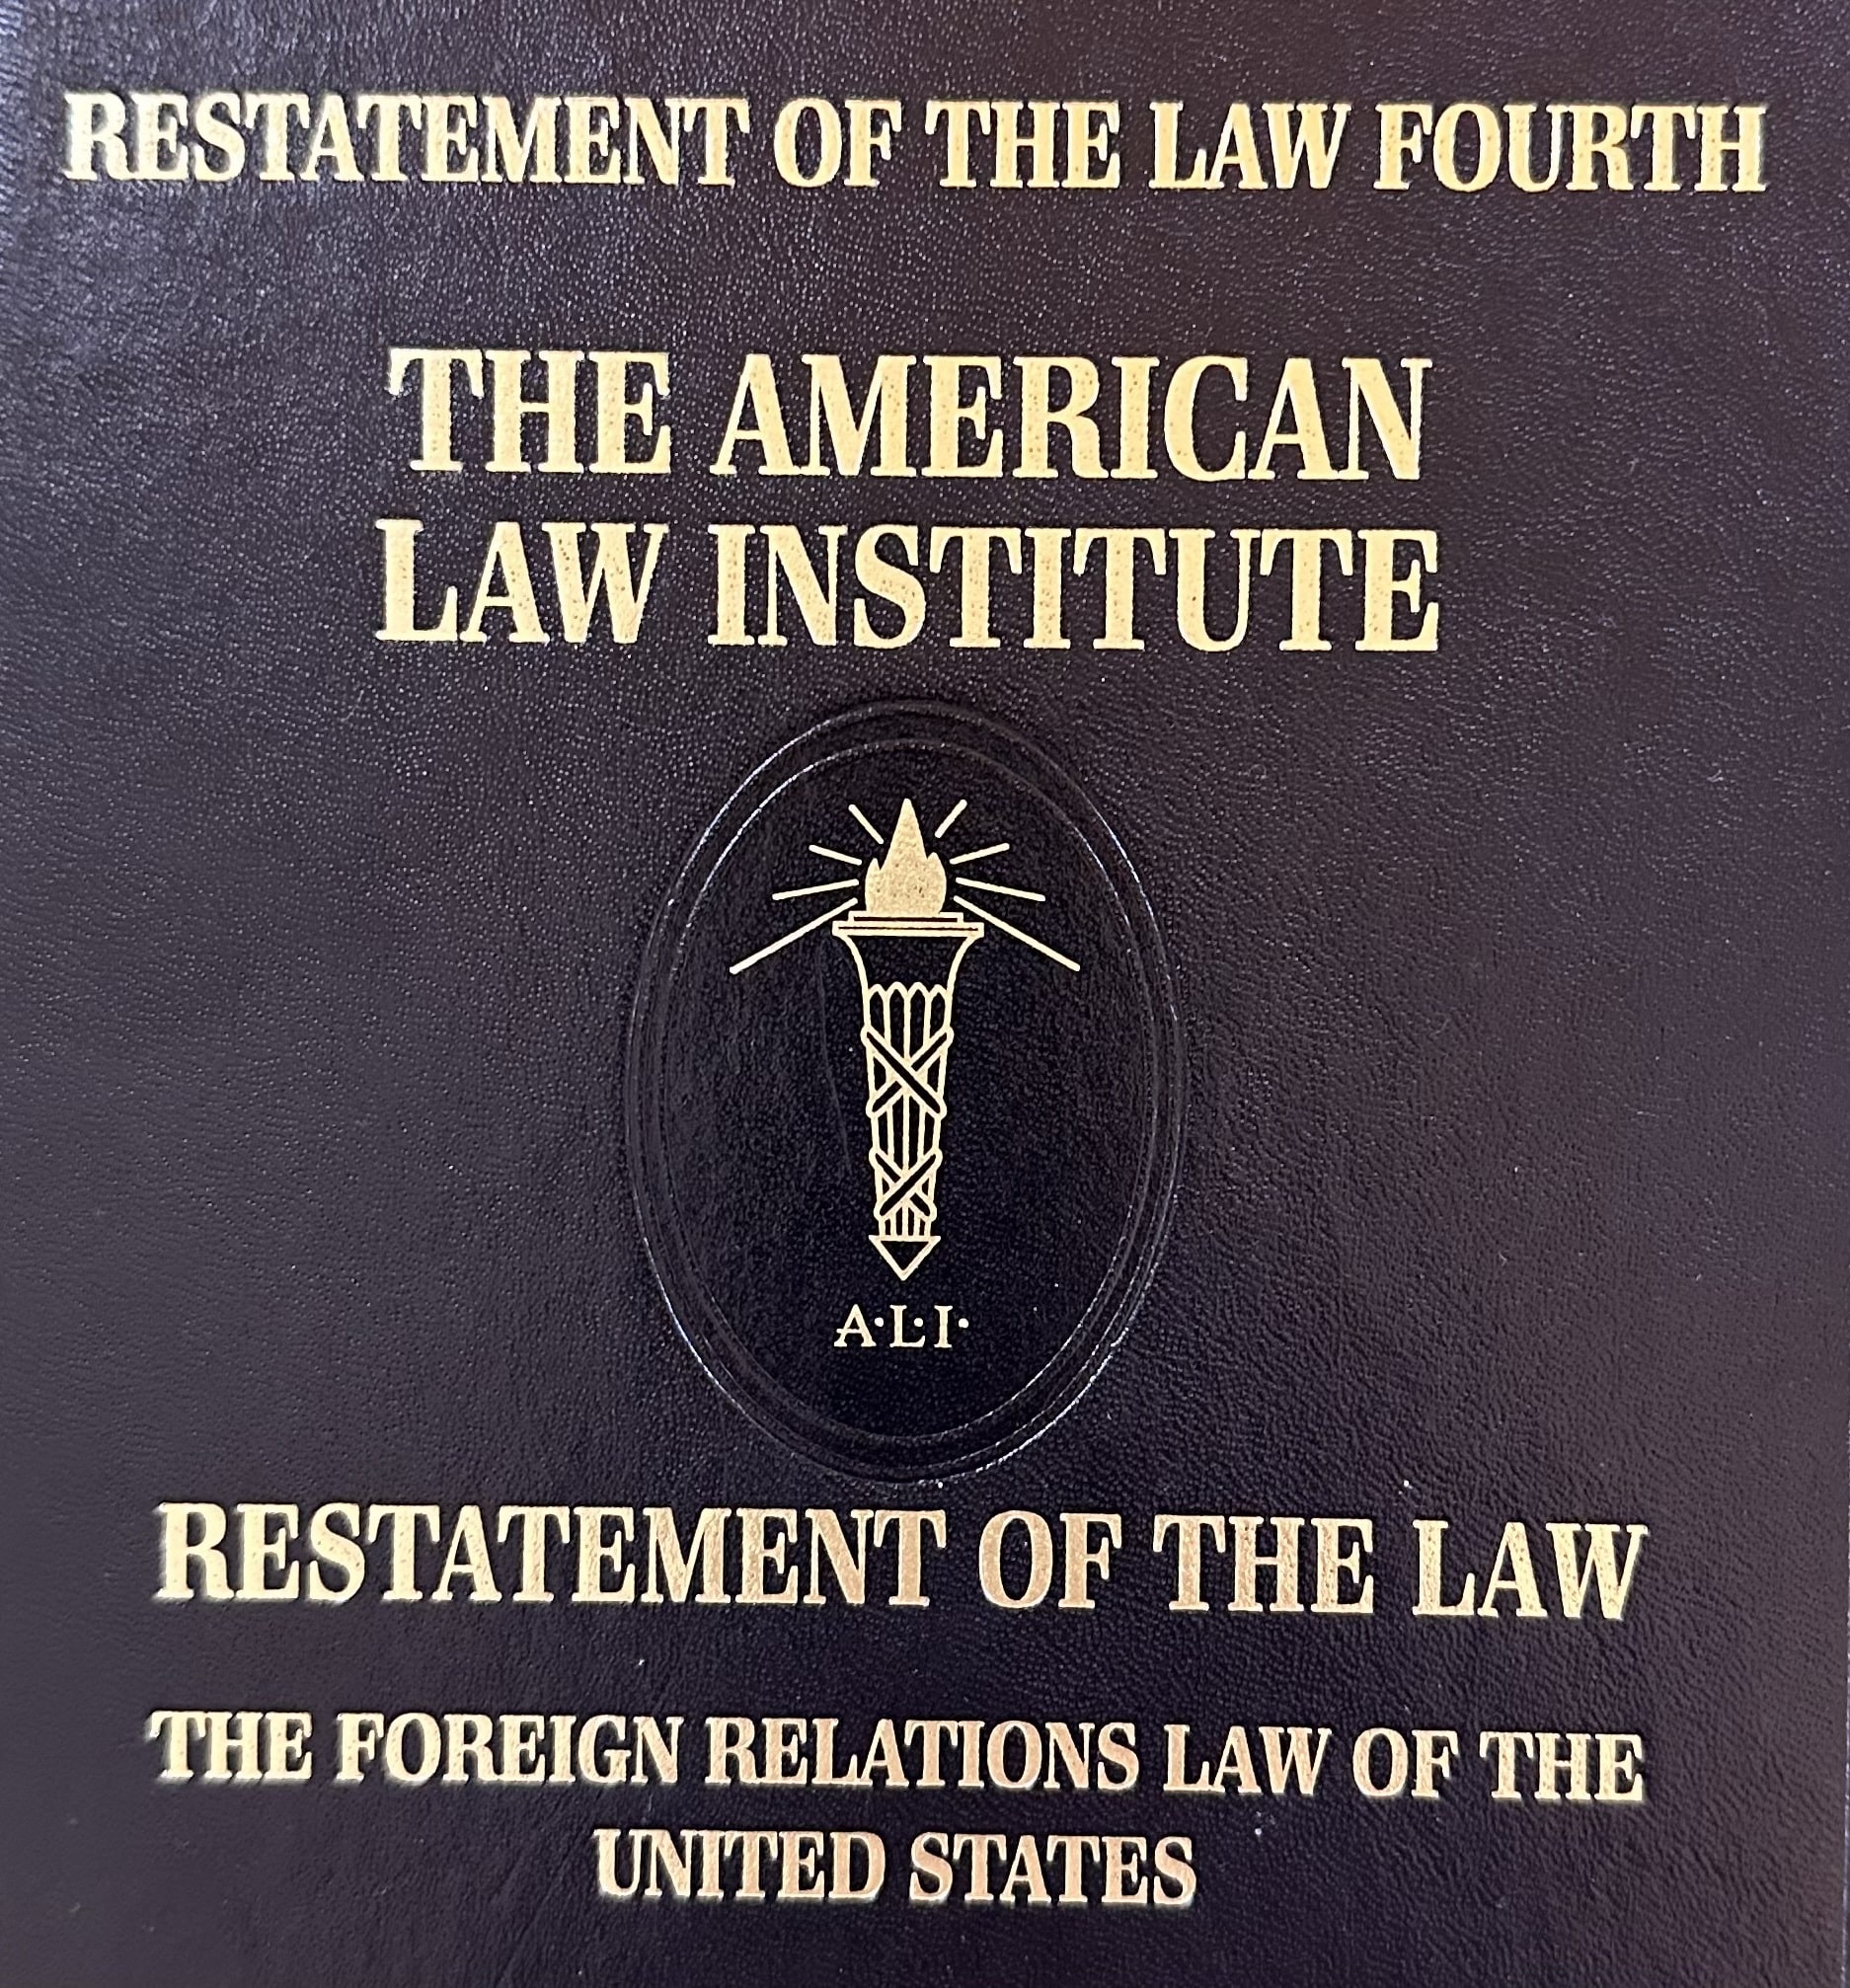 American Law Institute Launches Second Phase of Restatement